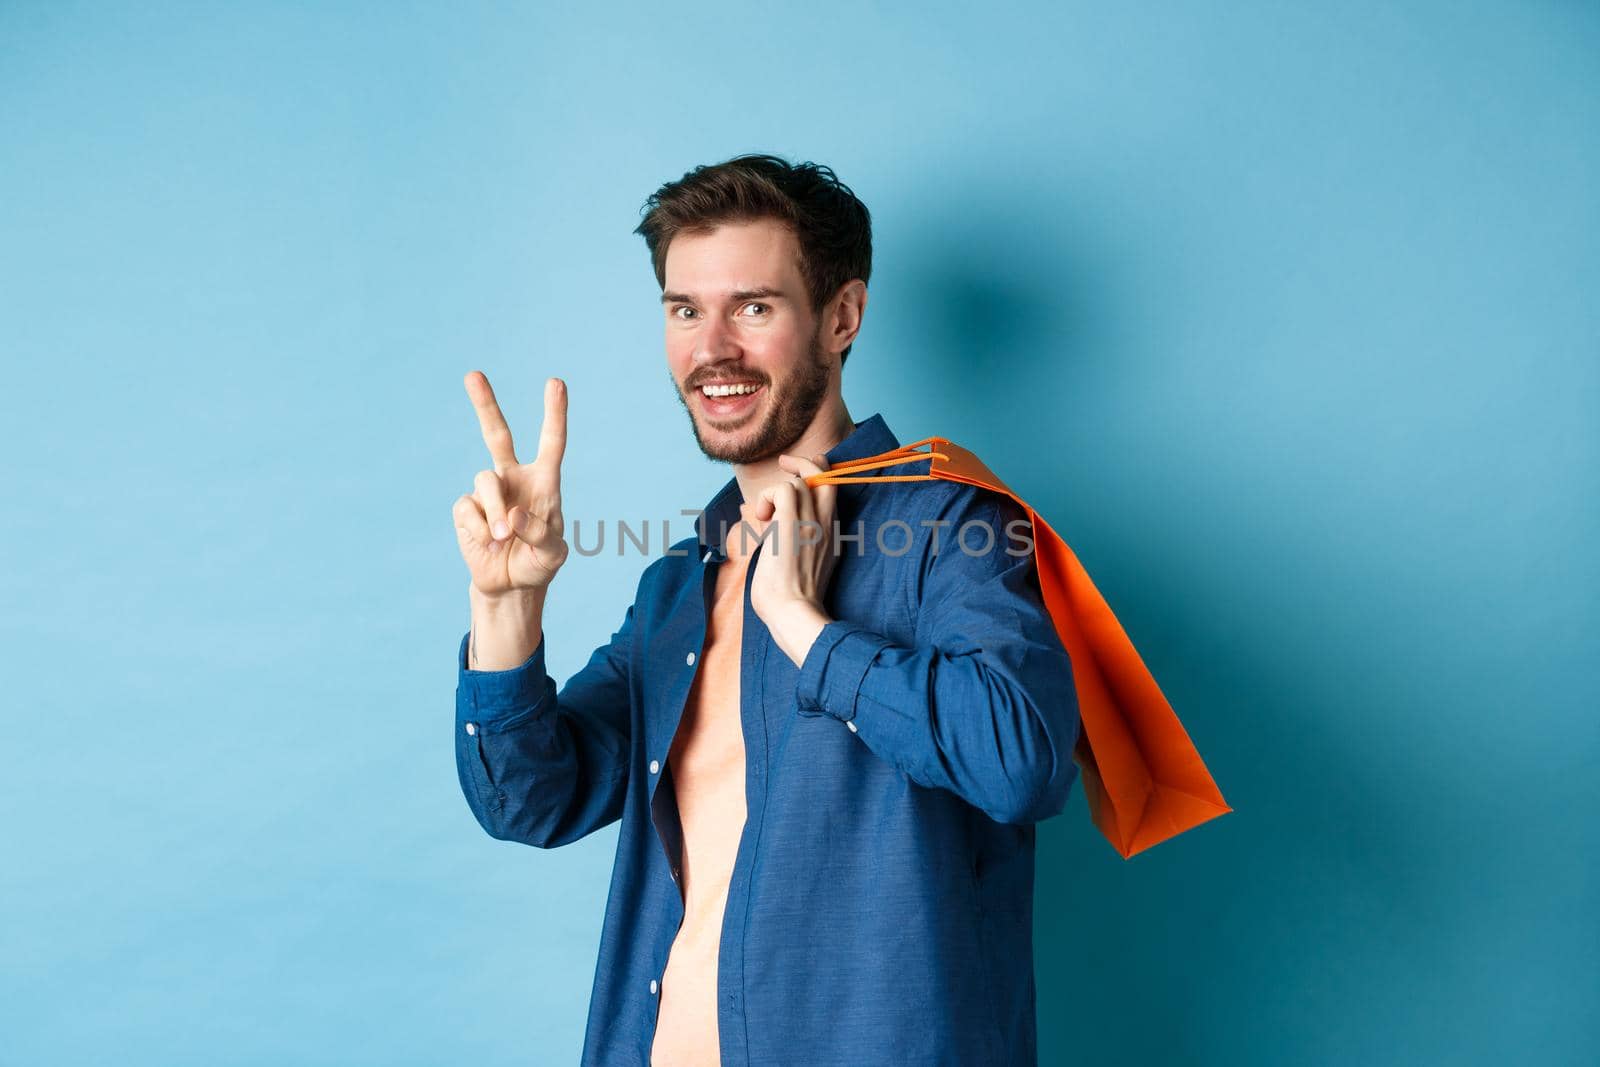 Cheerful guy holding orange shopping bag on shoulder, smiling and showing peace sign, standing on blue background. Copy space